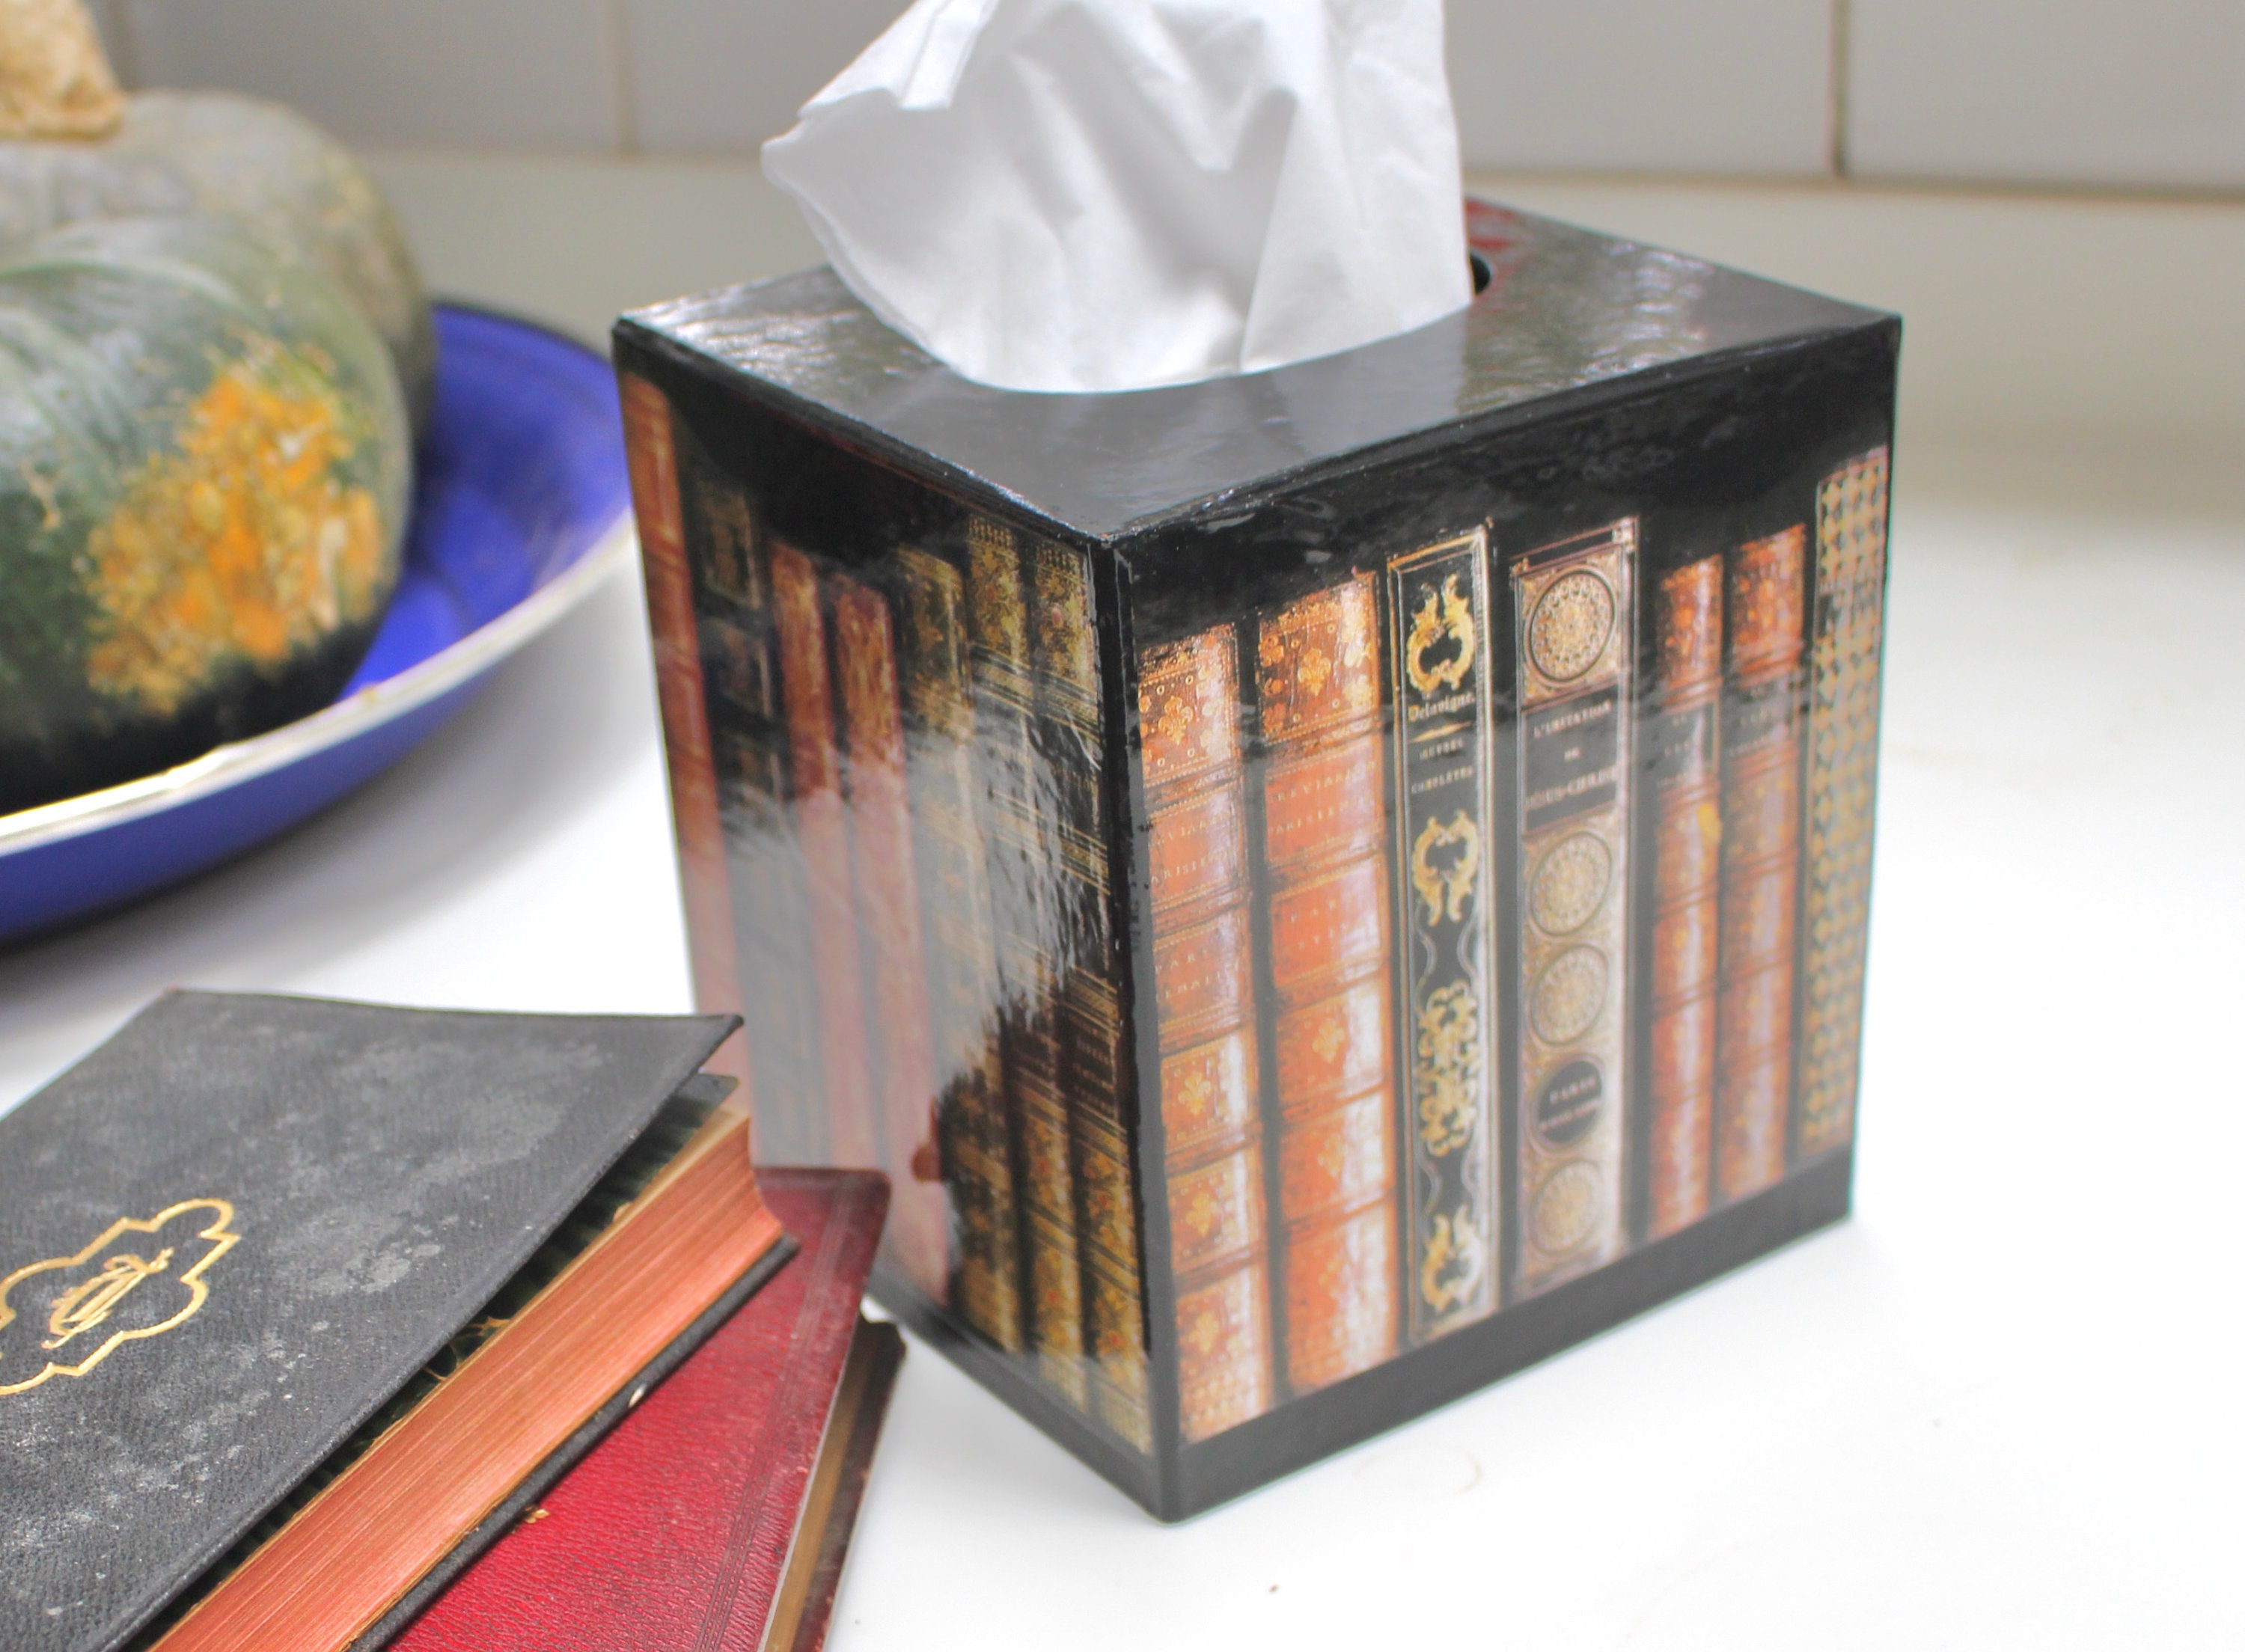  Crafted Classical Retro Wooden Antique Book Tissue Box